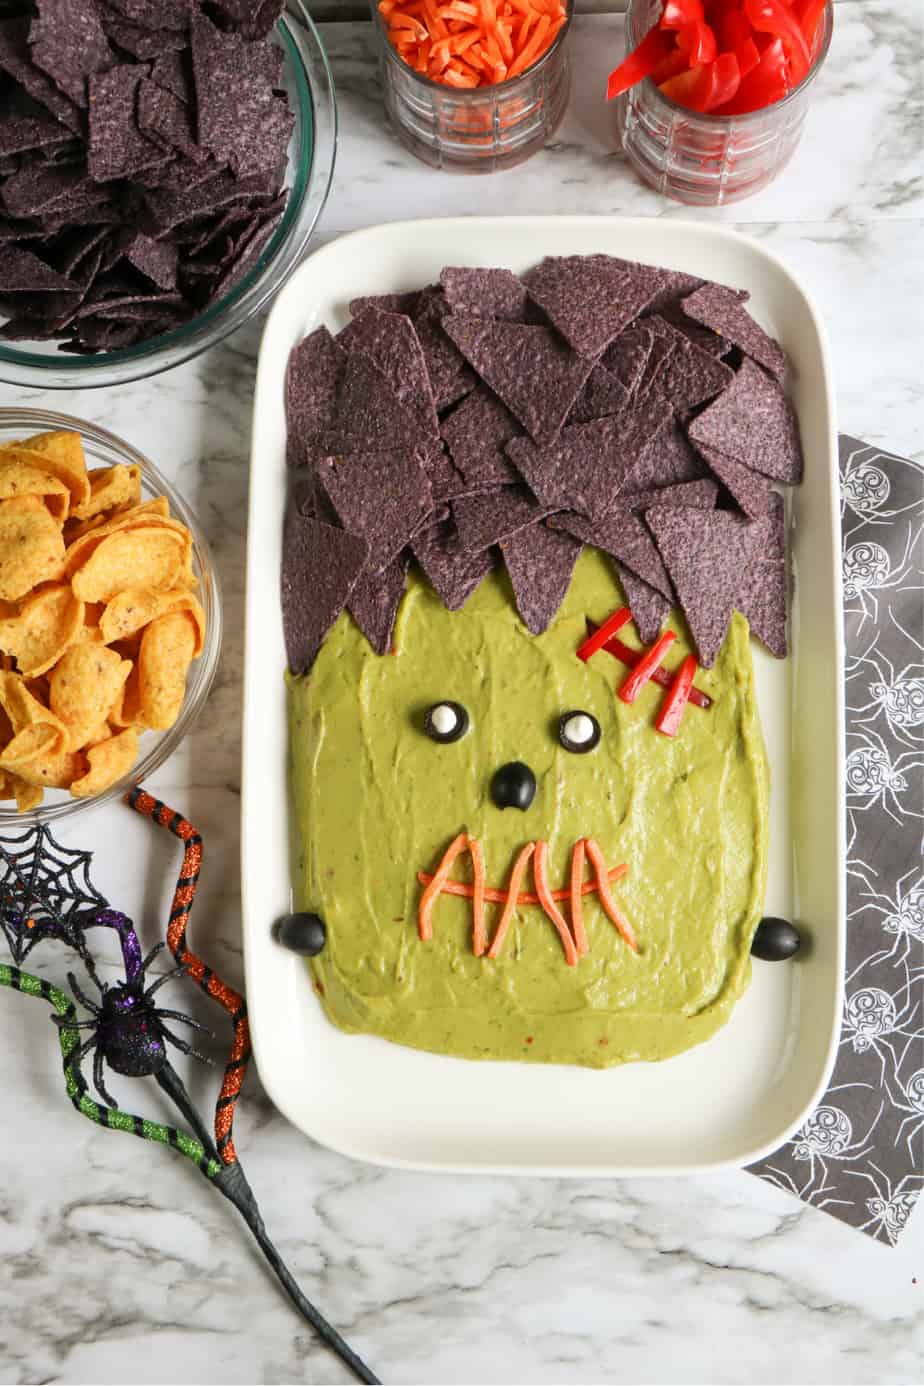 Plater of guacamole decorated to look like Frankenstein with jars of chips and veggies to dip in bowls